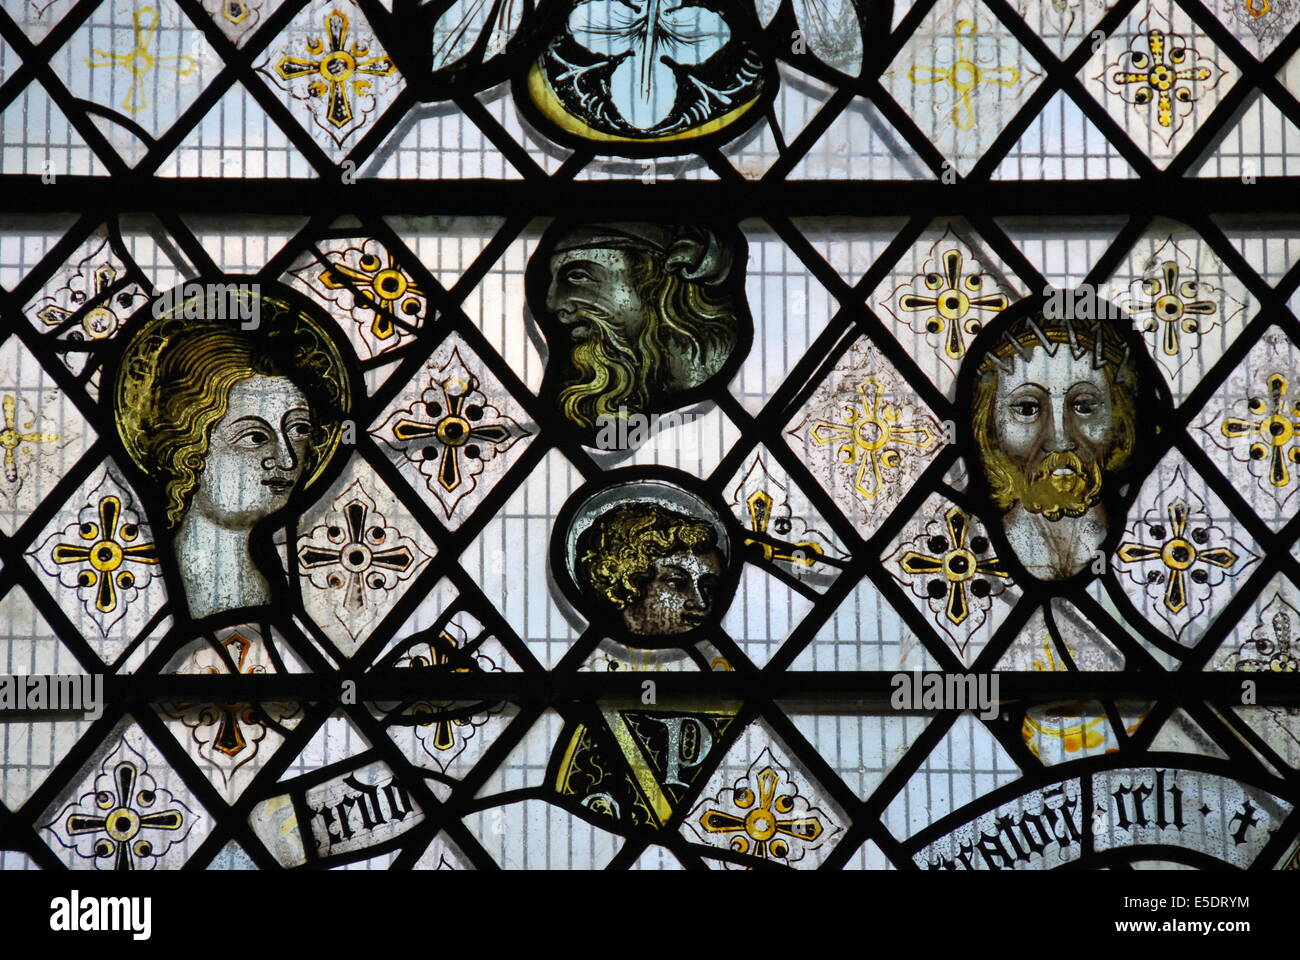 England. Ely Cathedral. Stained glass. man . woman. lead in diamond pattern . floral areas of pattern. yellow. black. writing. Stock Photo